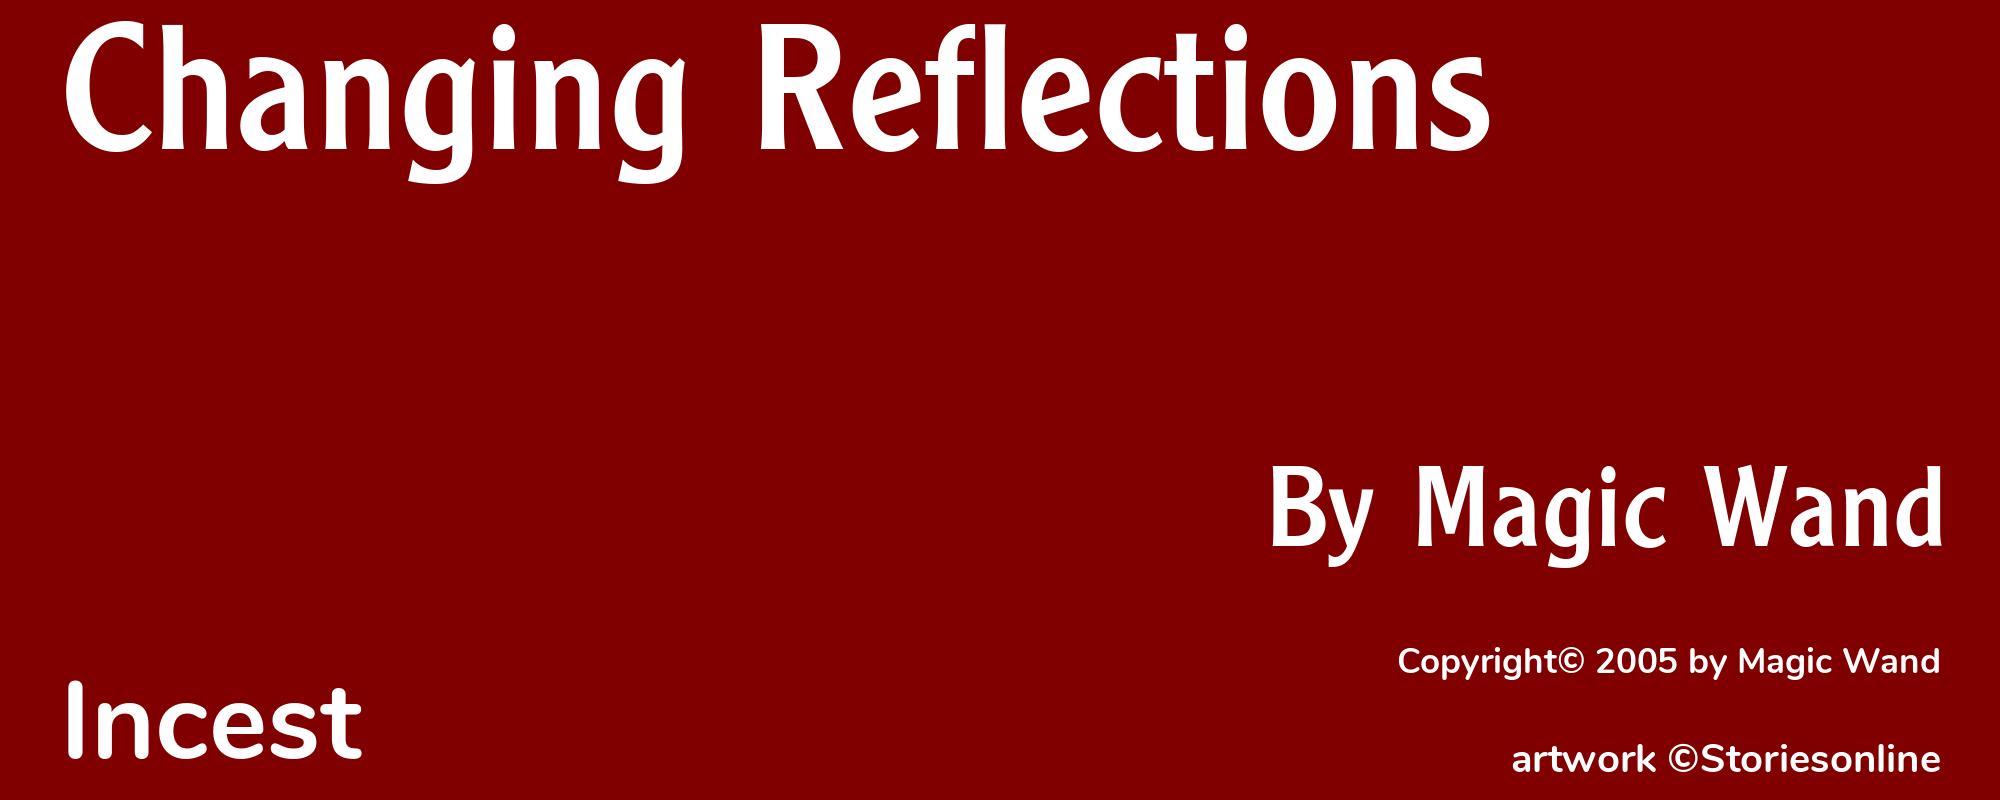 Changing Reflections - Cover